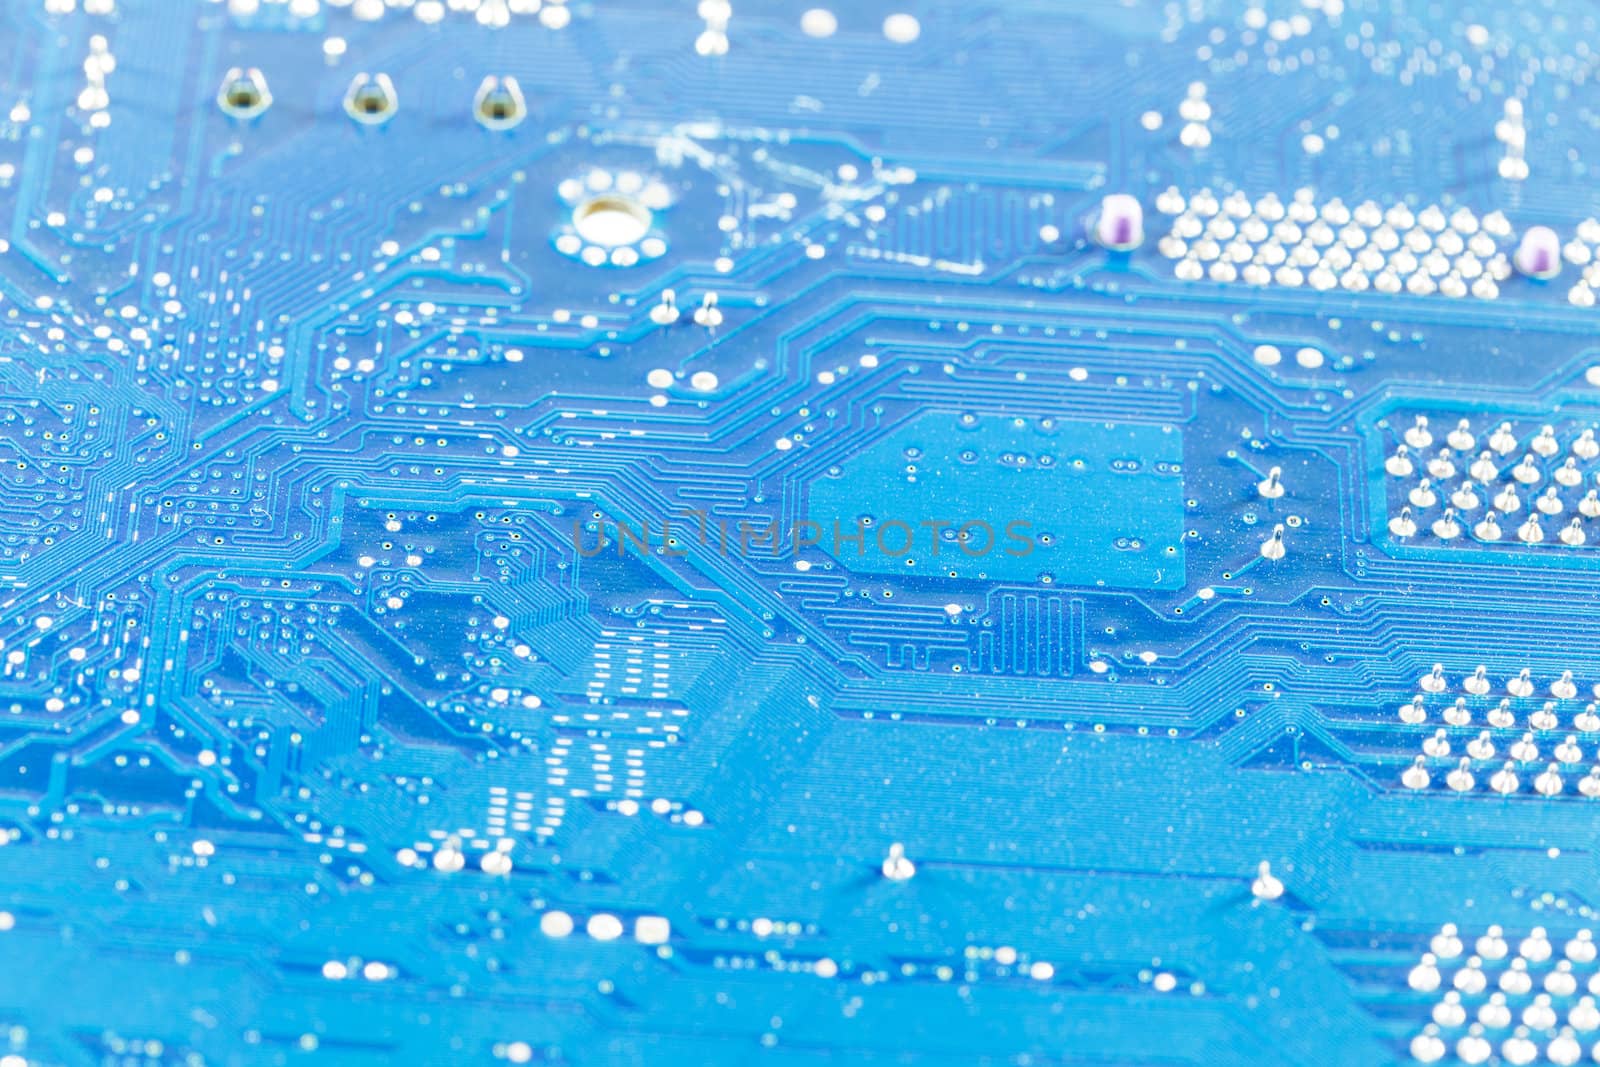 close up of the blue circuit board